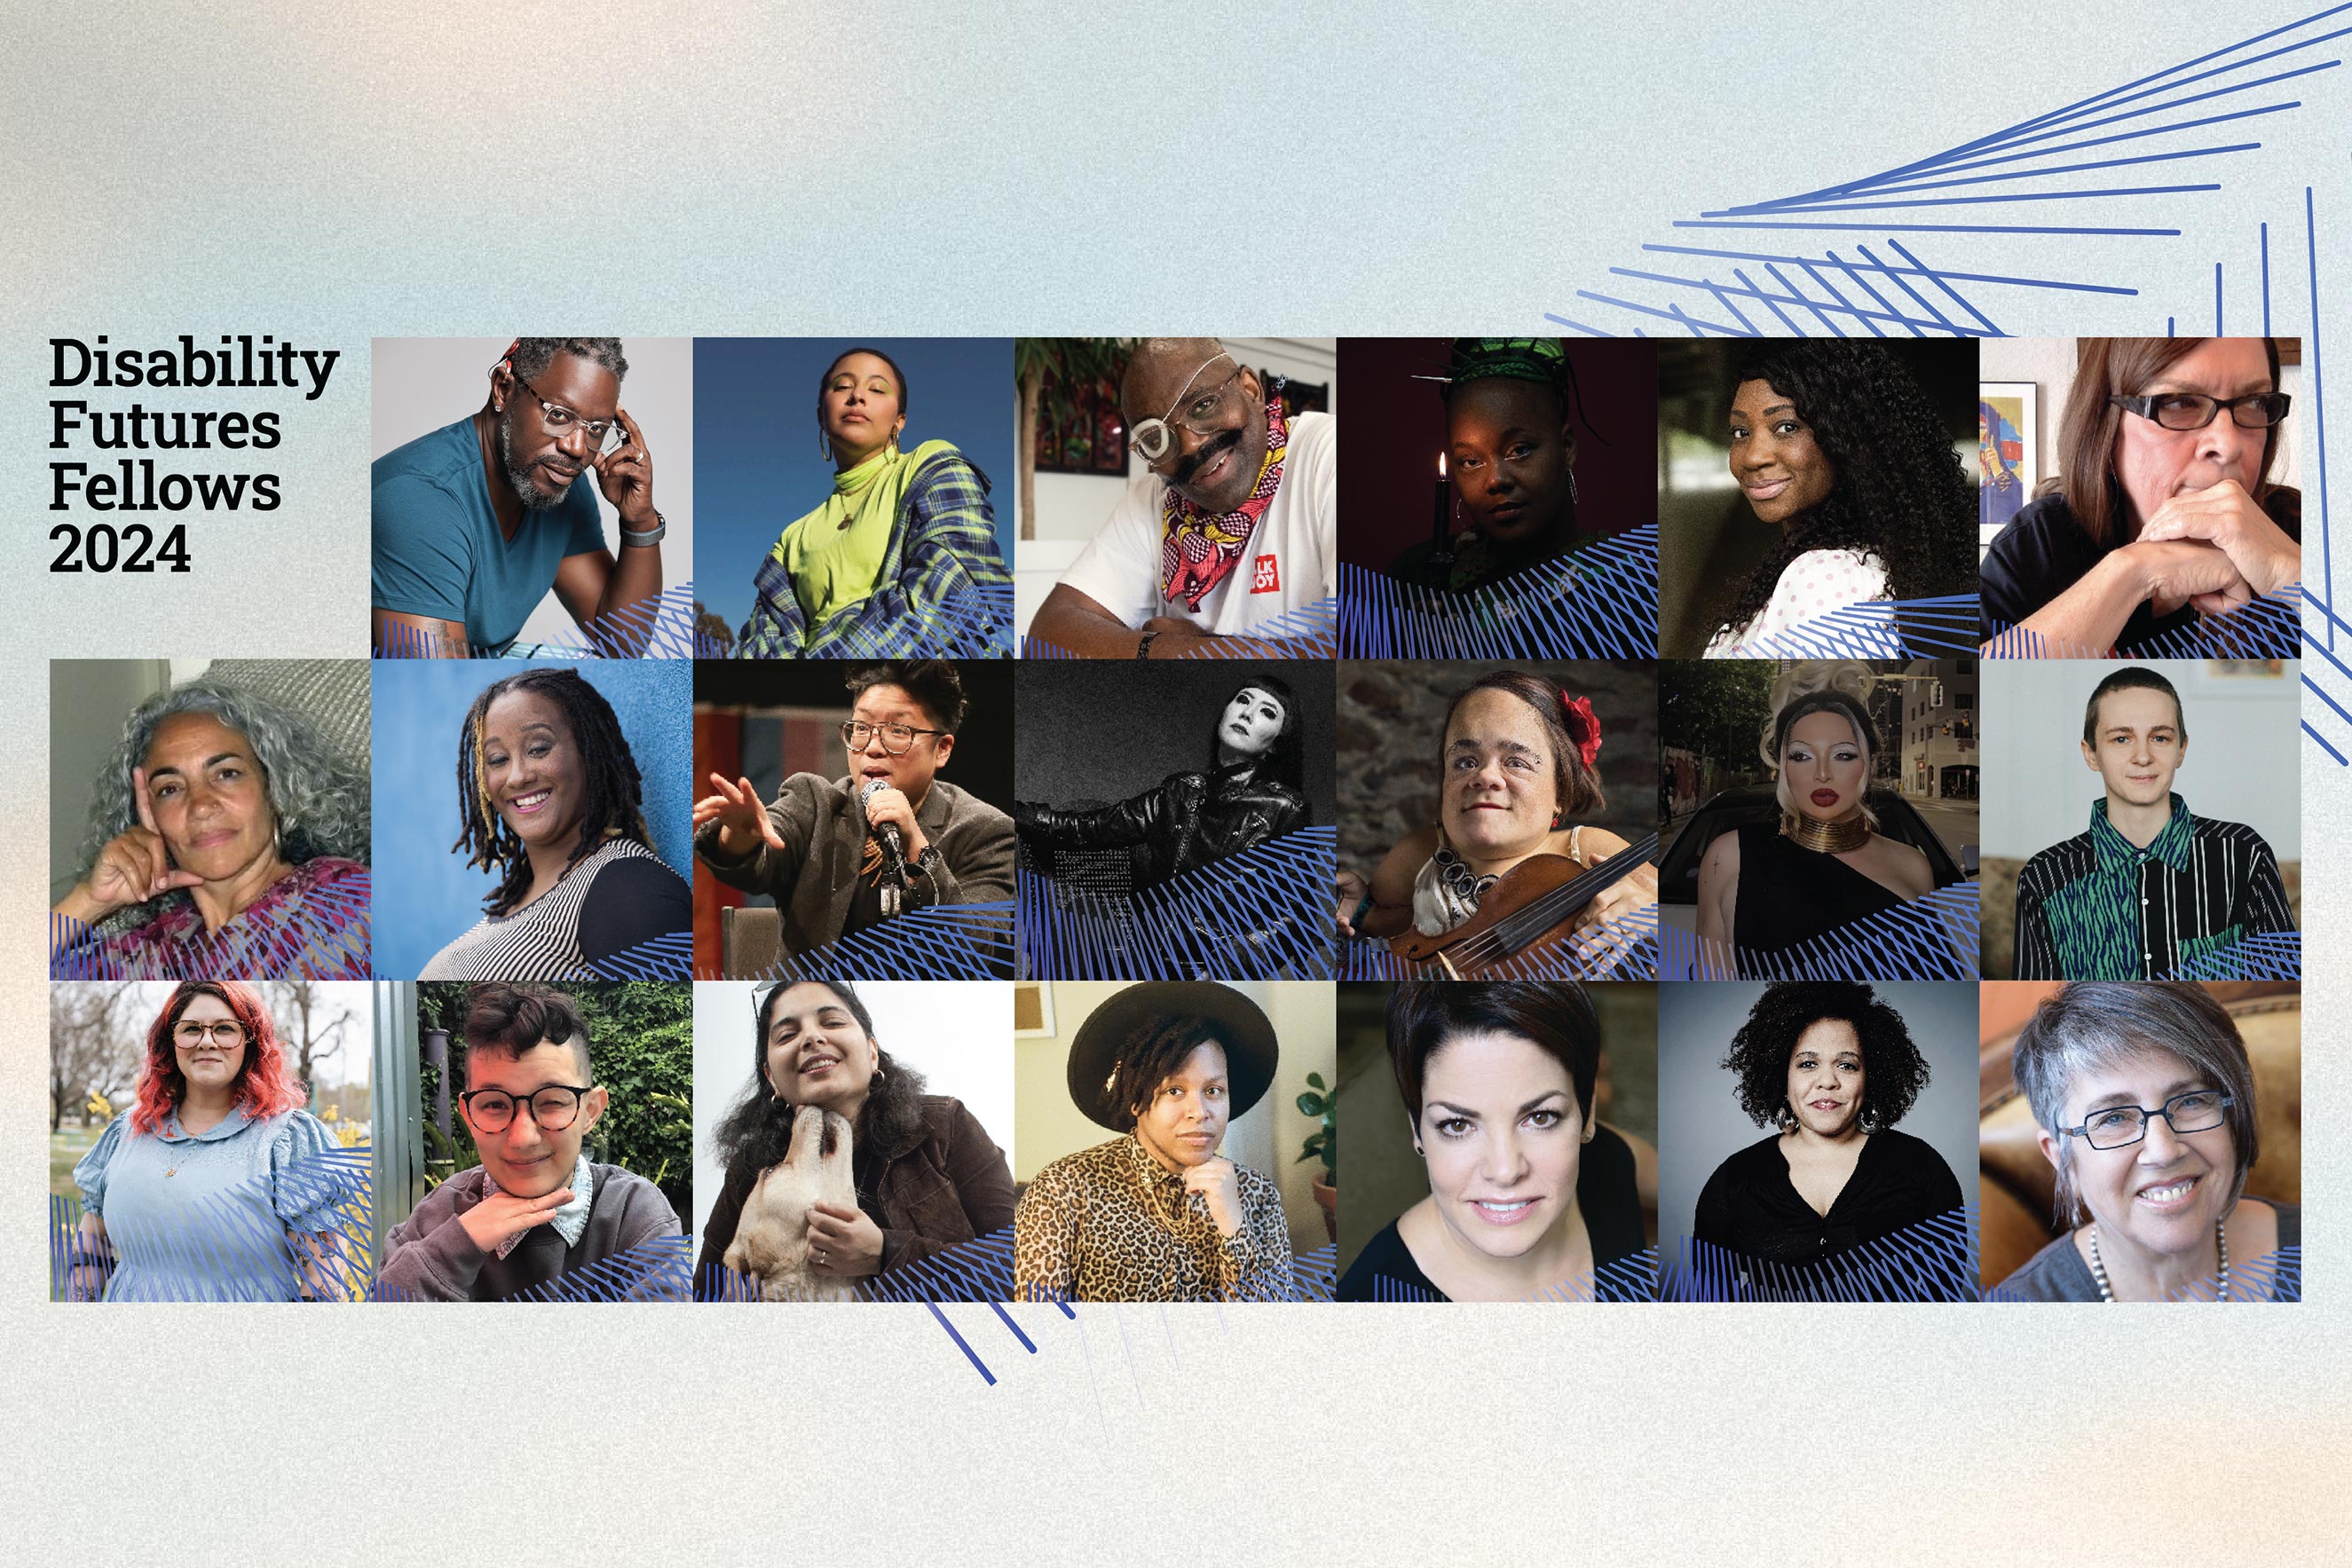 A grid of 20 diverse individuals representing the Disability Futures Fellows 2024. Featuring people with different appearances, attire, and expressions, the image also has text on the left side reading "Disability Futures Fellows 2024" with a blue-and-white abstract background.